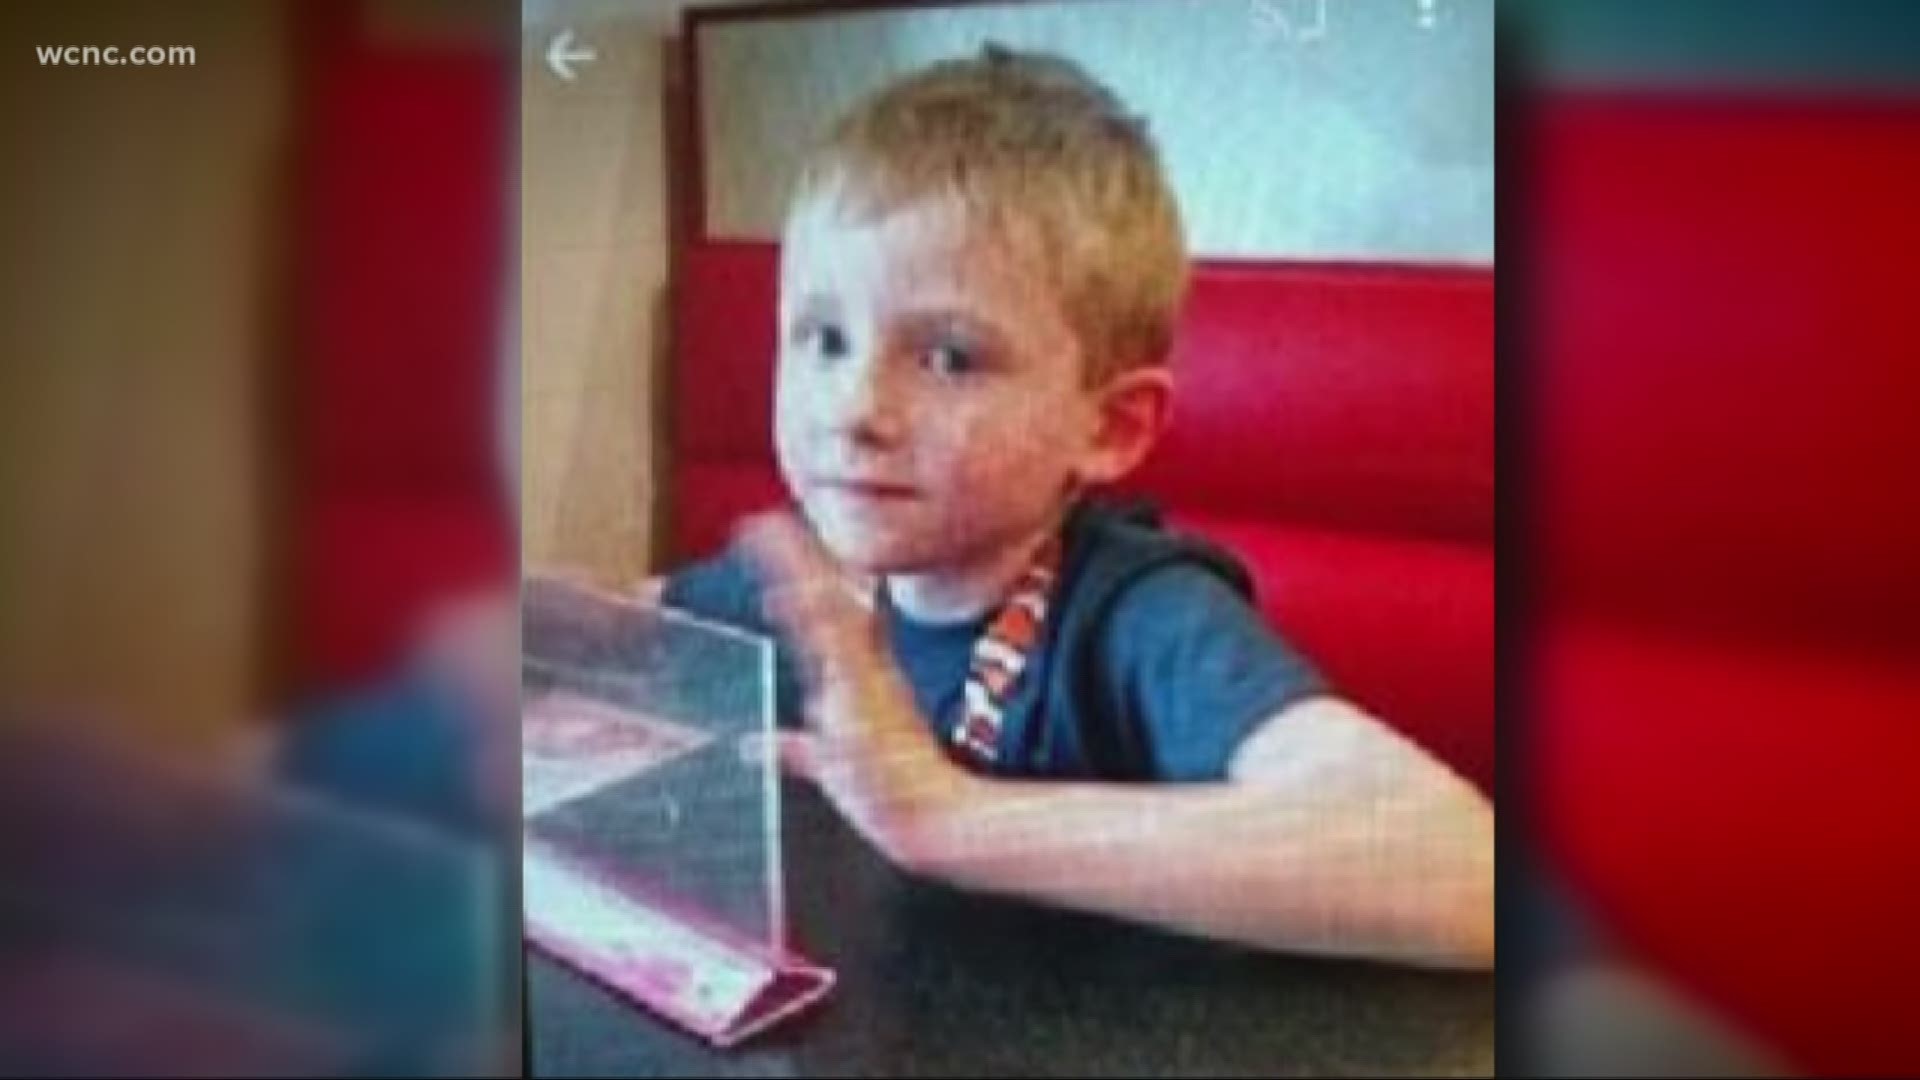 Funeral plans were announced Sunday morning for Maddox Ritch, the six-year-old who was found dead after being missing for six days.